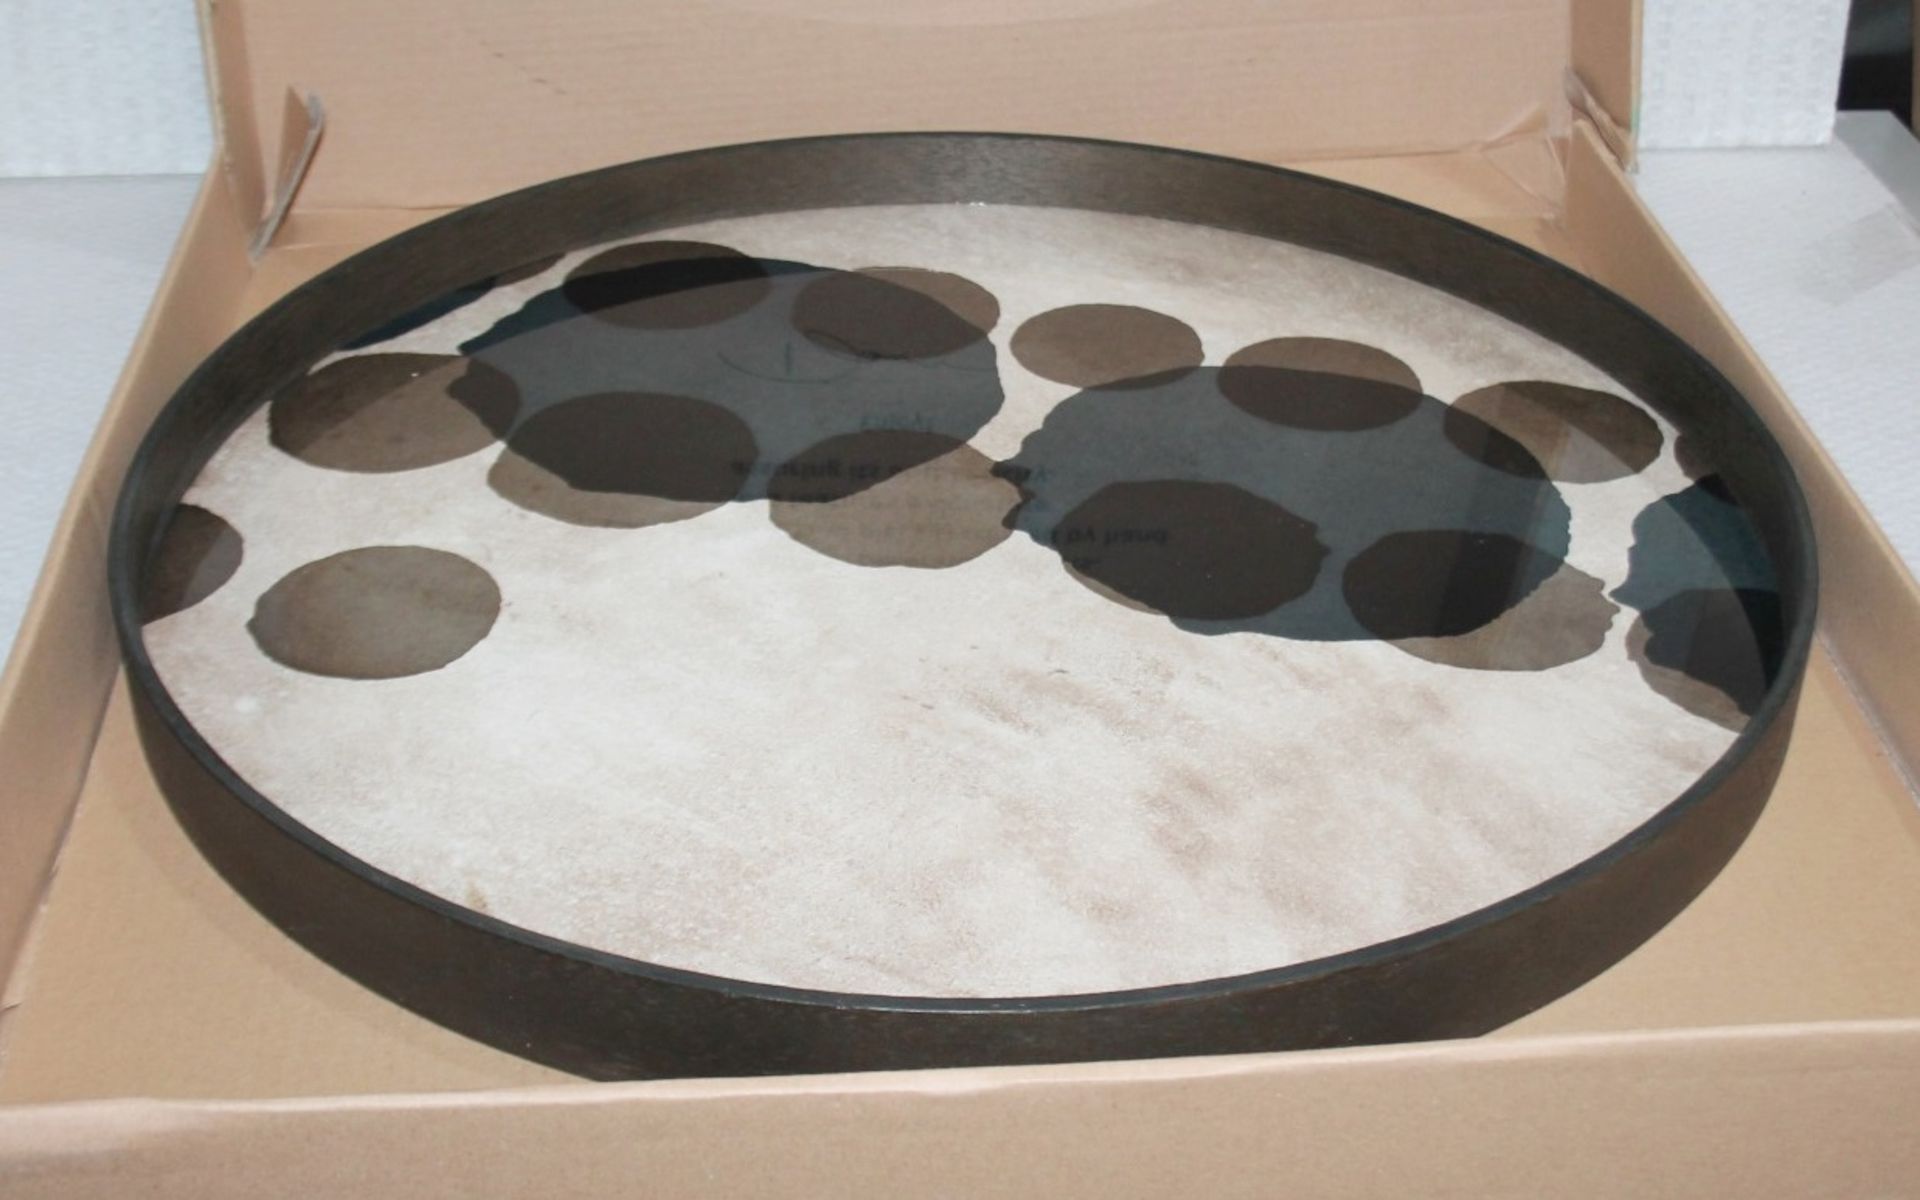 1 x ETHNICRAFT 'Notre Monde' Slate Layered Dots Large Round Glass Tray - Original Price £159.00 - Image 3 of 6